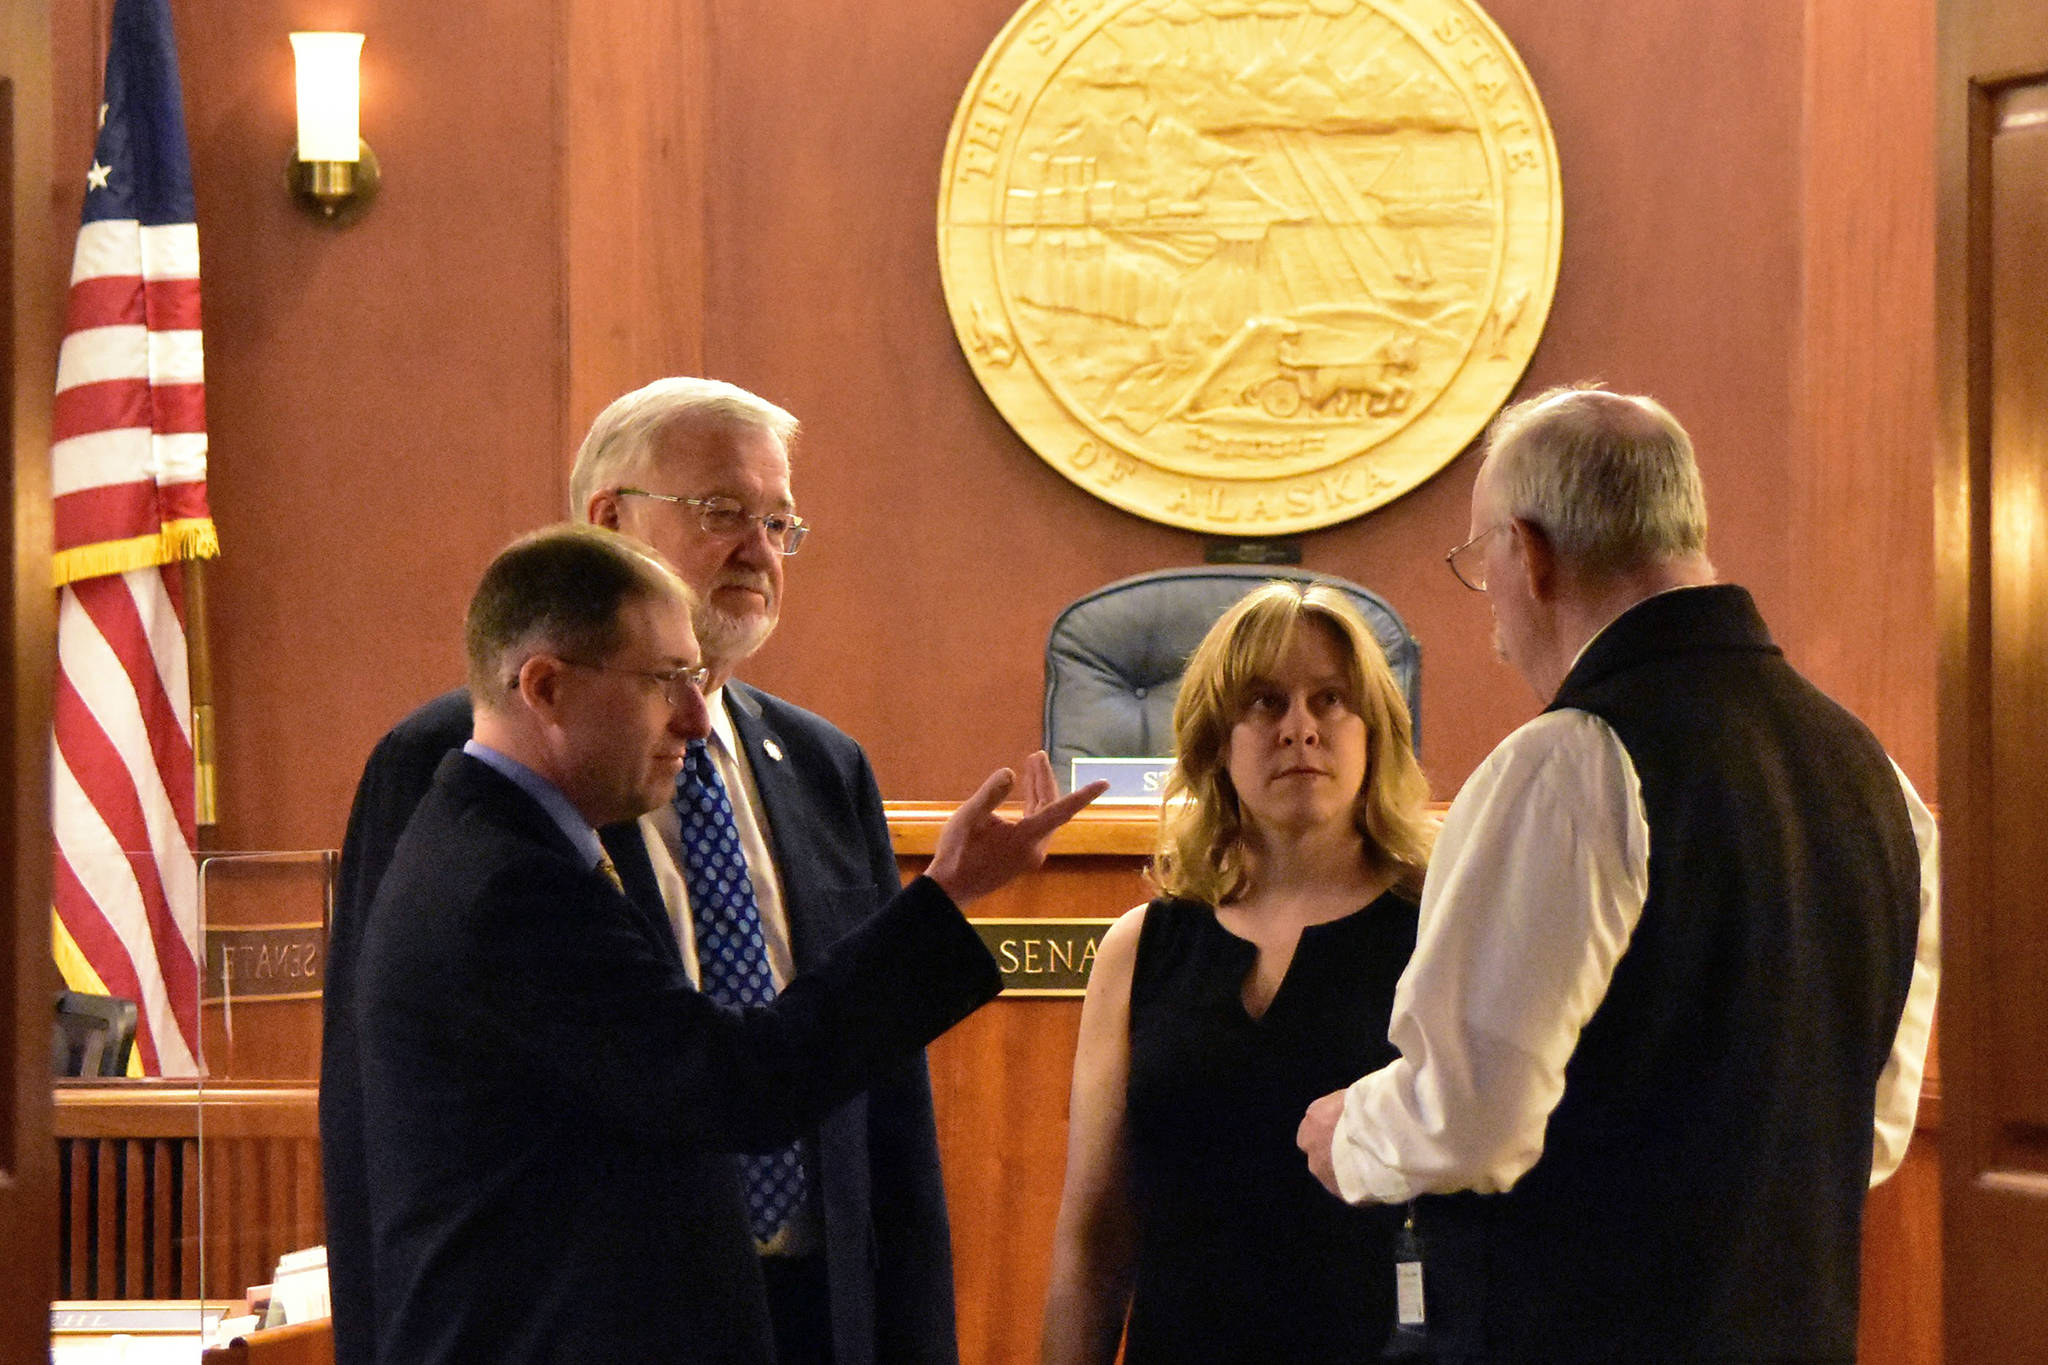 From left to right: Sens. Jesse Kiehl, D-Juneau; Gary Stevens, R-Kodiak; Mia Costello, R-Anchorage, and Bert Stedman, R-Sitka, speak on the floor of the Alaska Senate on Monday, May 24, 2021, the first day of one of two special sessions called by Gov. Mike Dunleavy. (Peter Segall / Juneau Empire)